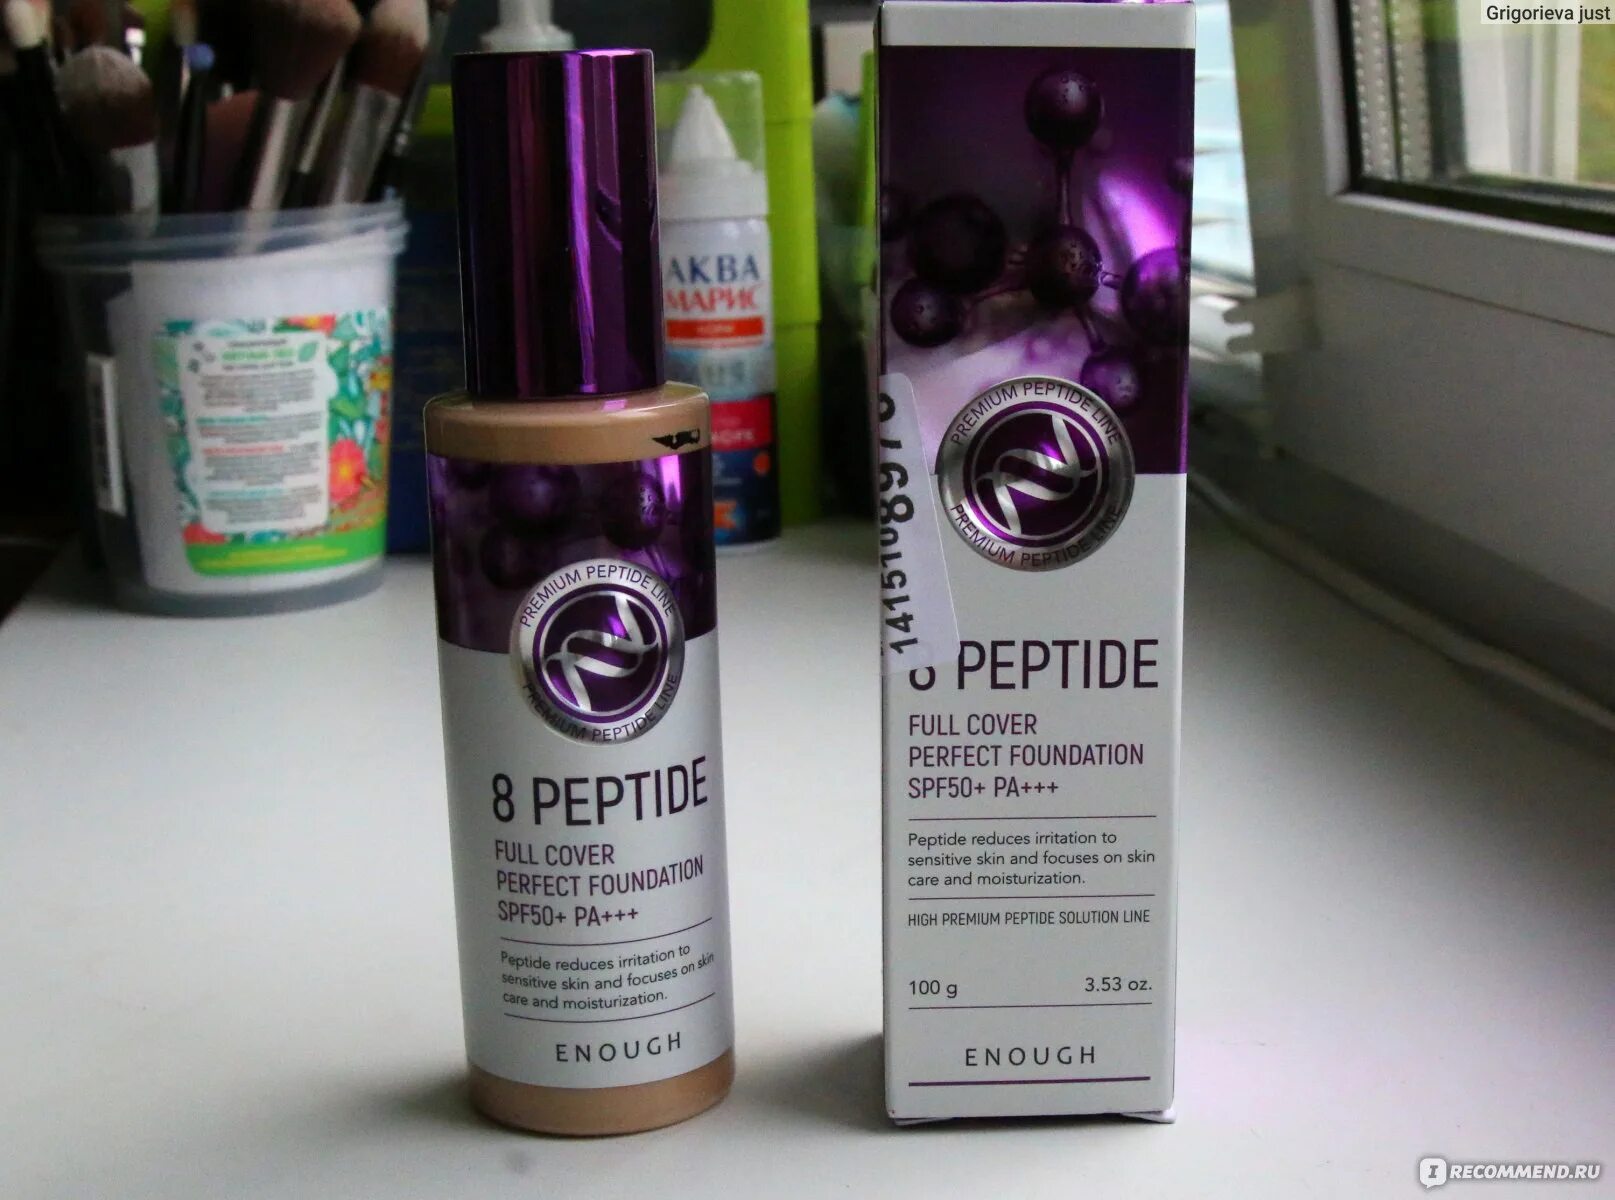 8 peptide full cover perfect